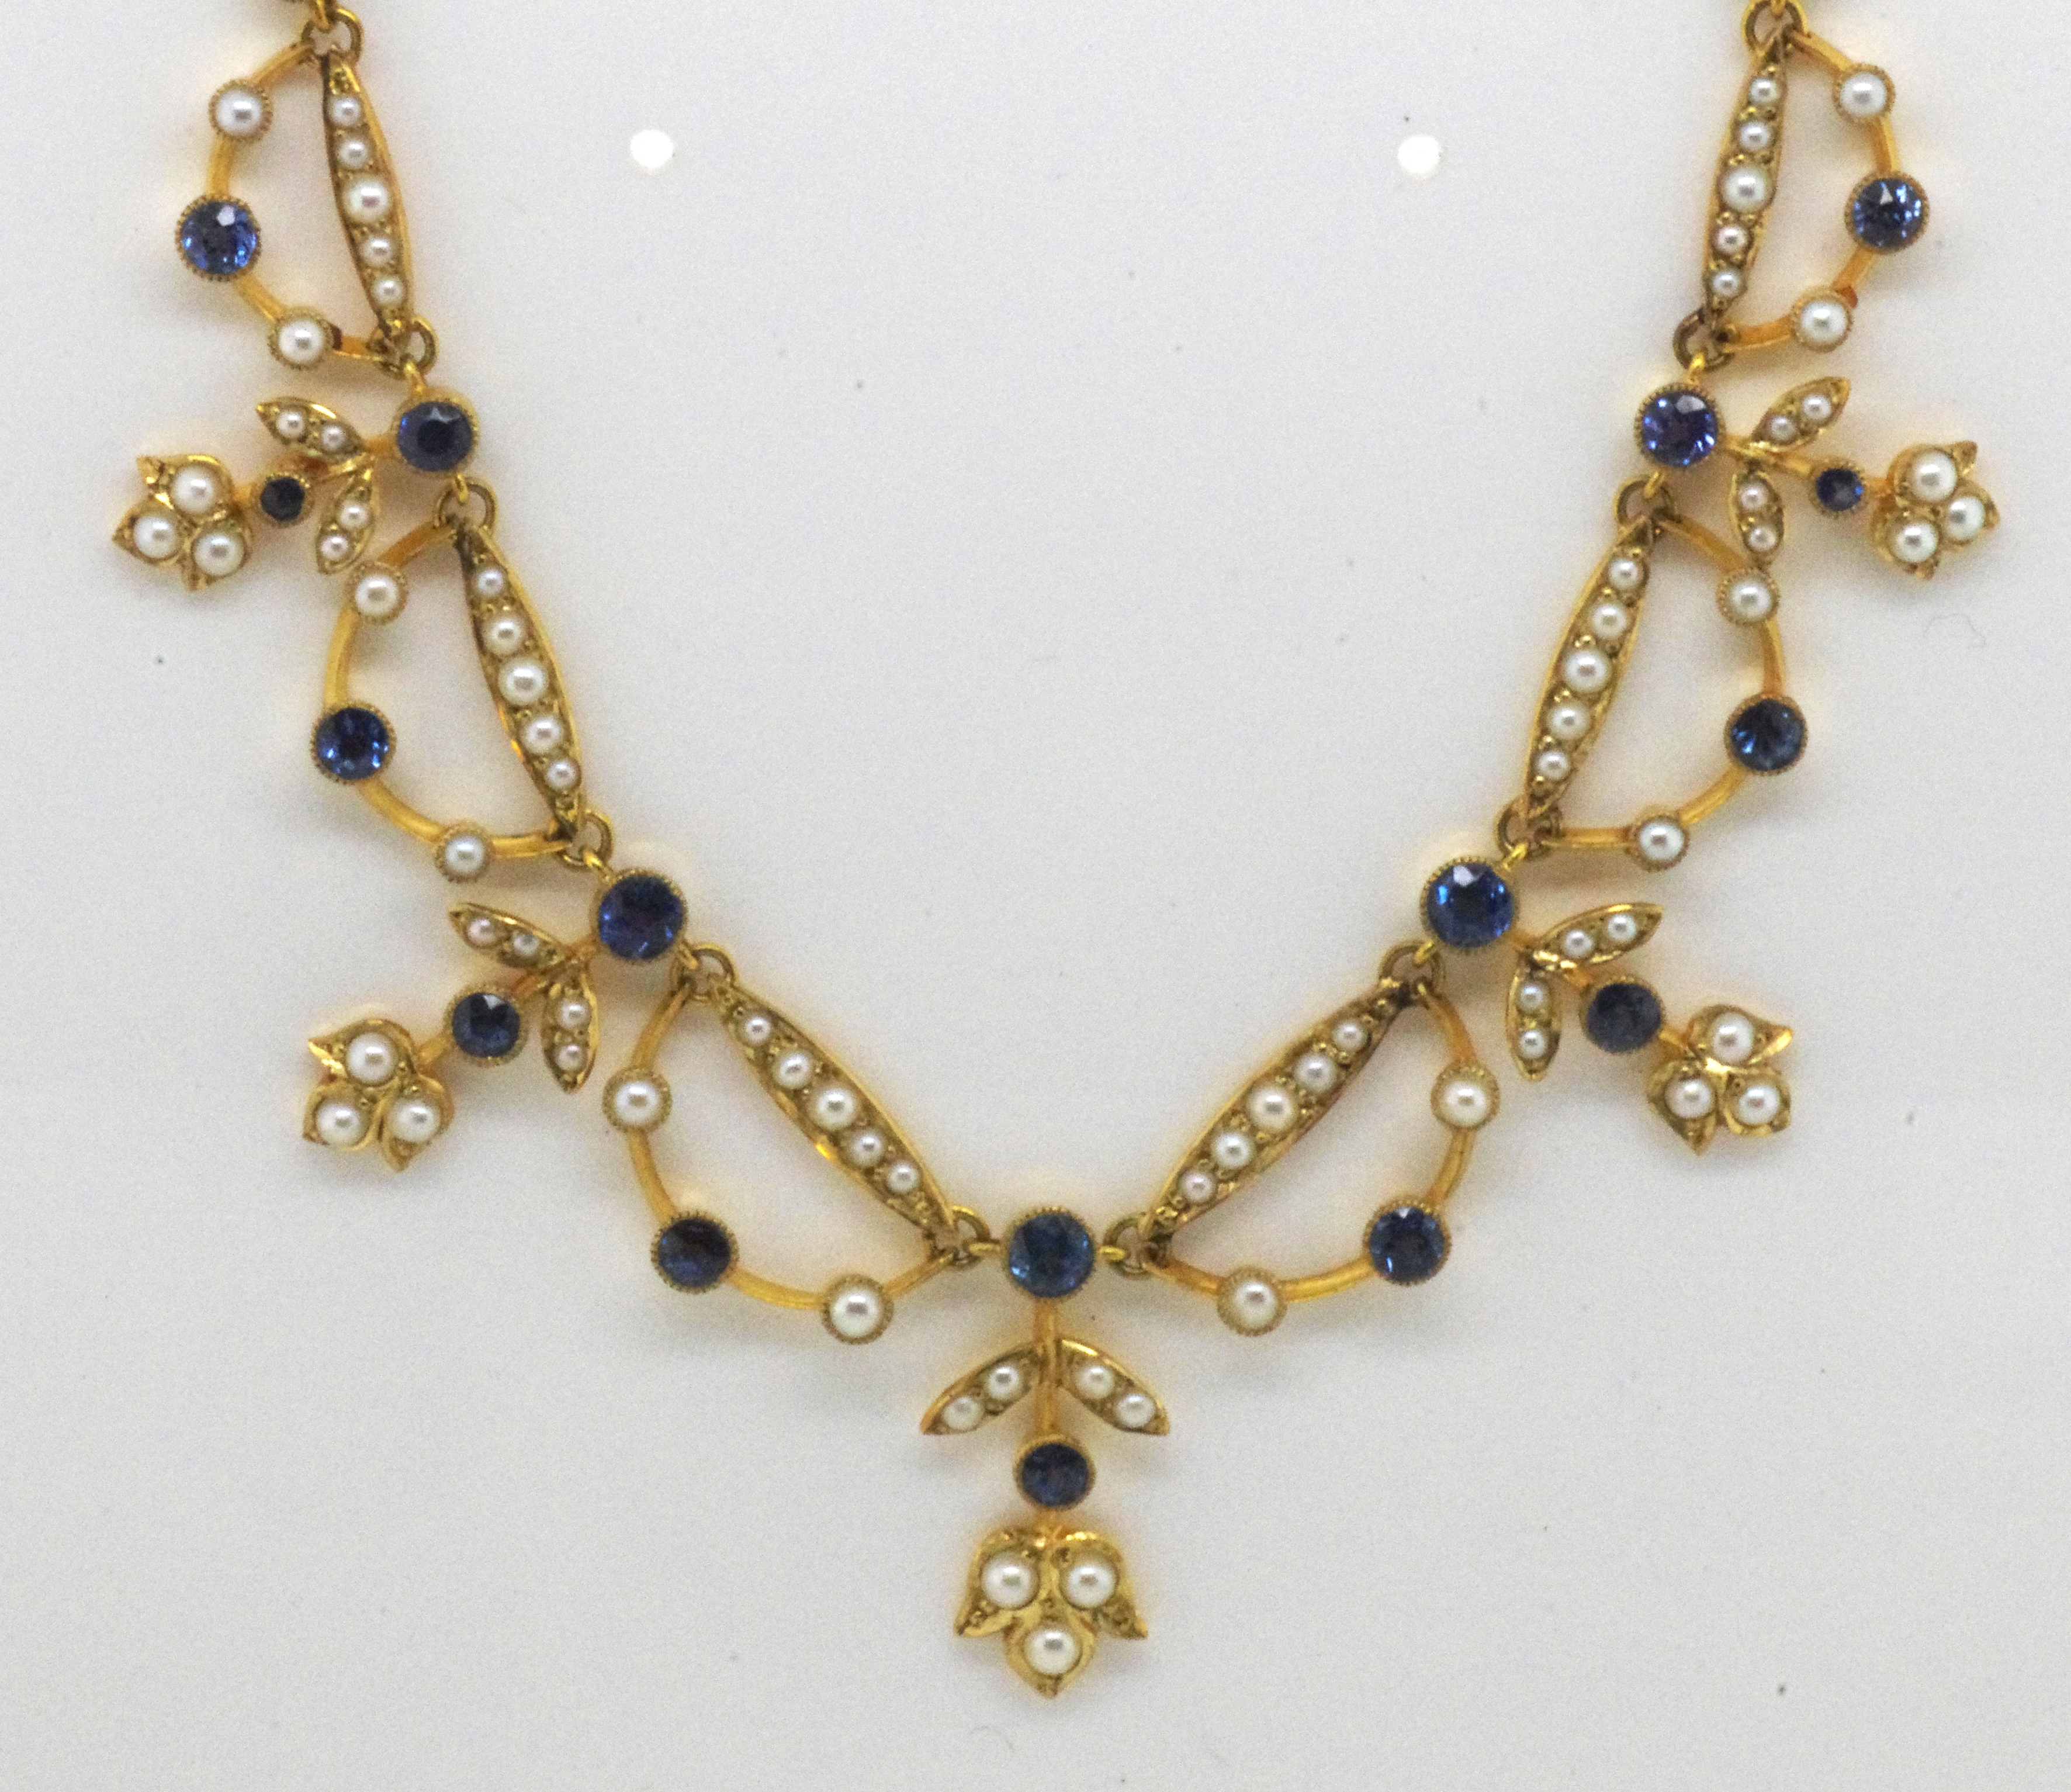 Edwardian gold, sapphire & pearl necklace - Image 4 of 5